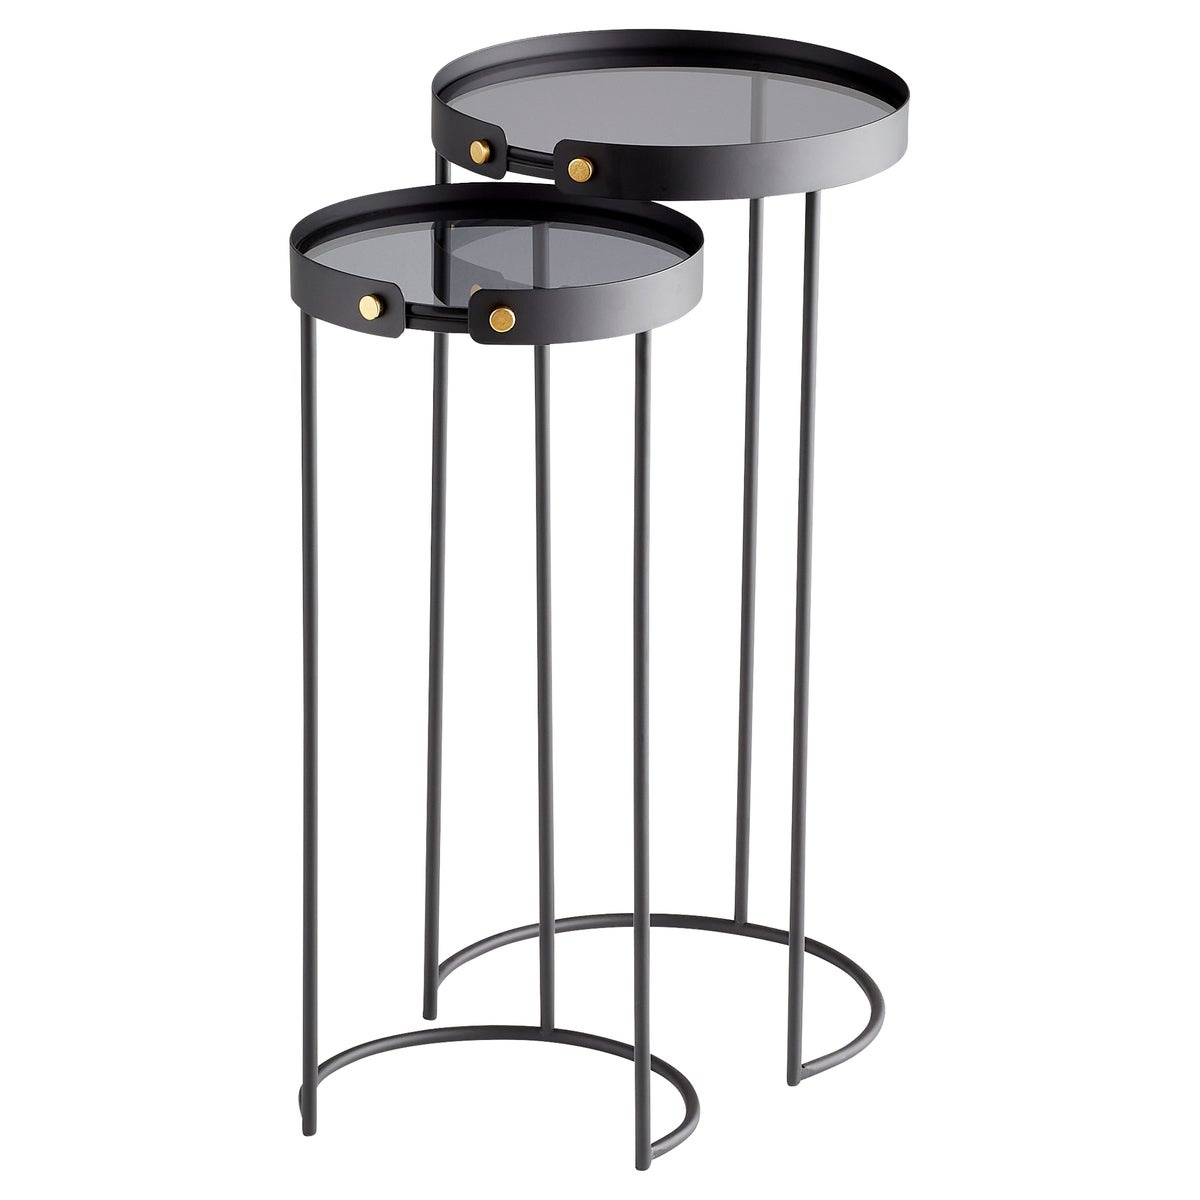 Graphite Tall Bow Tie Tables